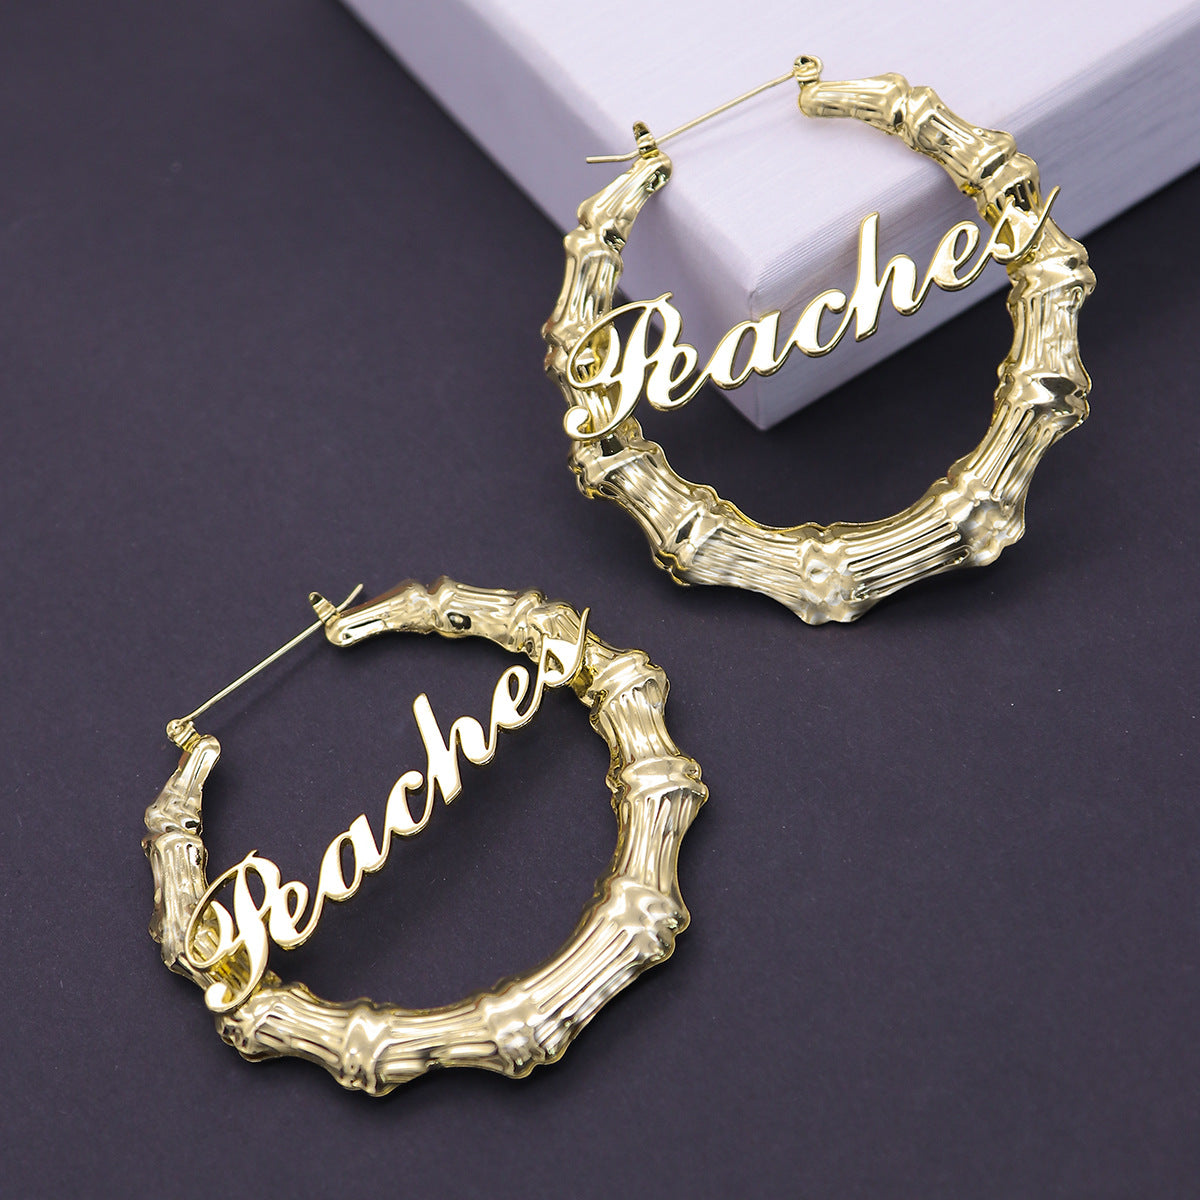 A pair of Customized Titanium Steel Name Bamboo Earrings Round with the word beach by Maramalive™.